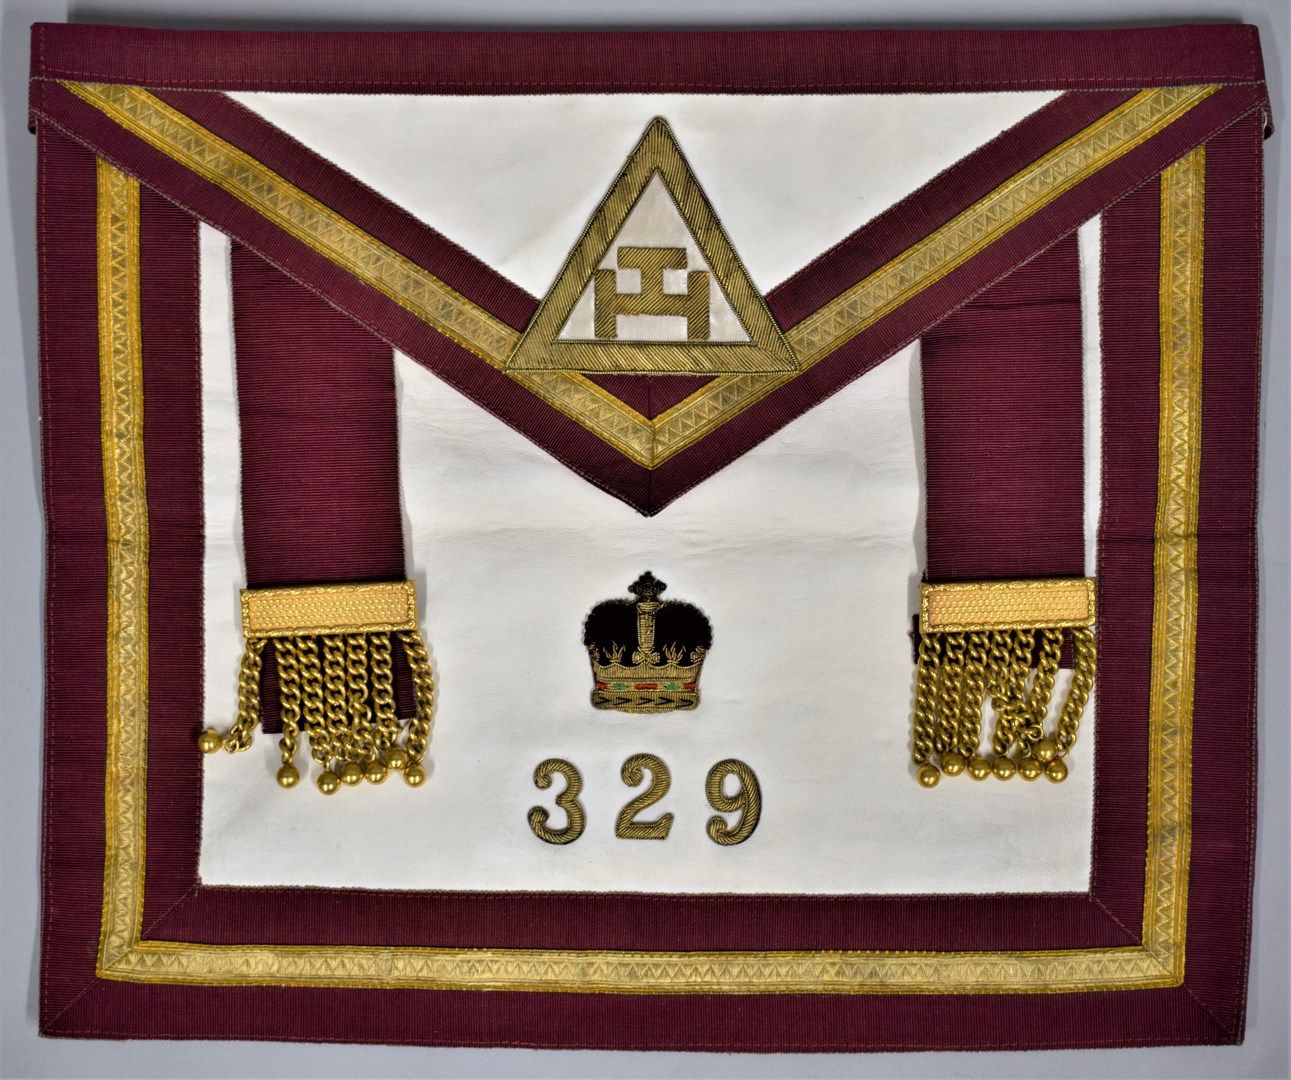 Null Apron of the Royal Arch.

Chapter 329.

H. 38.5 cm - L. 33 cm